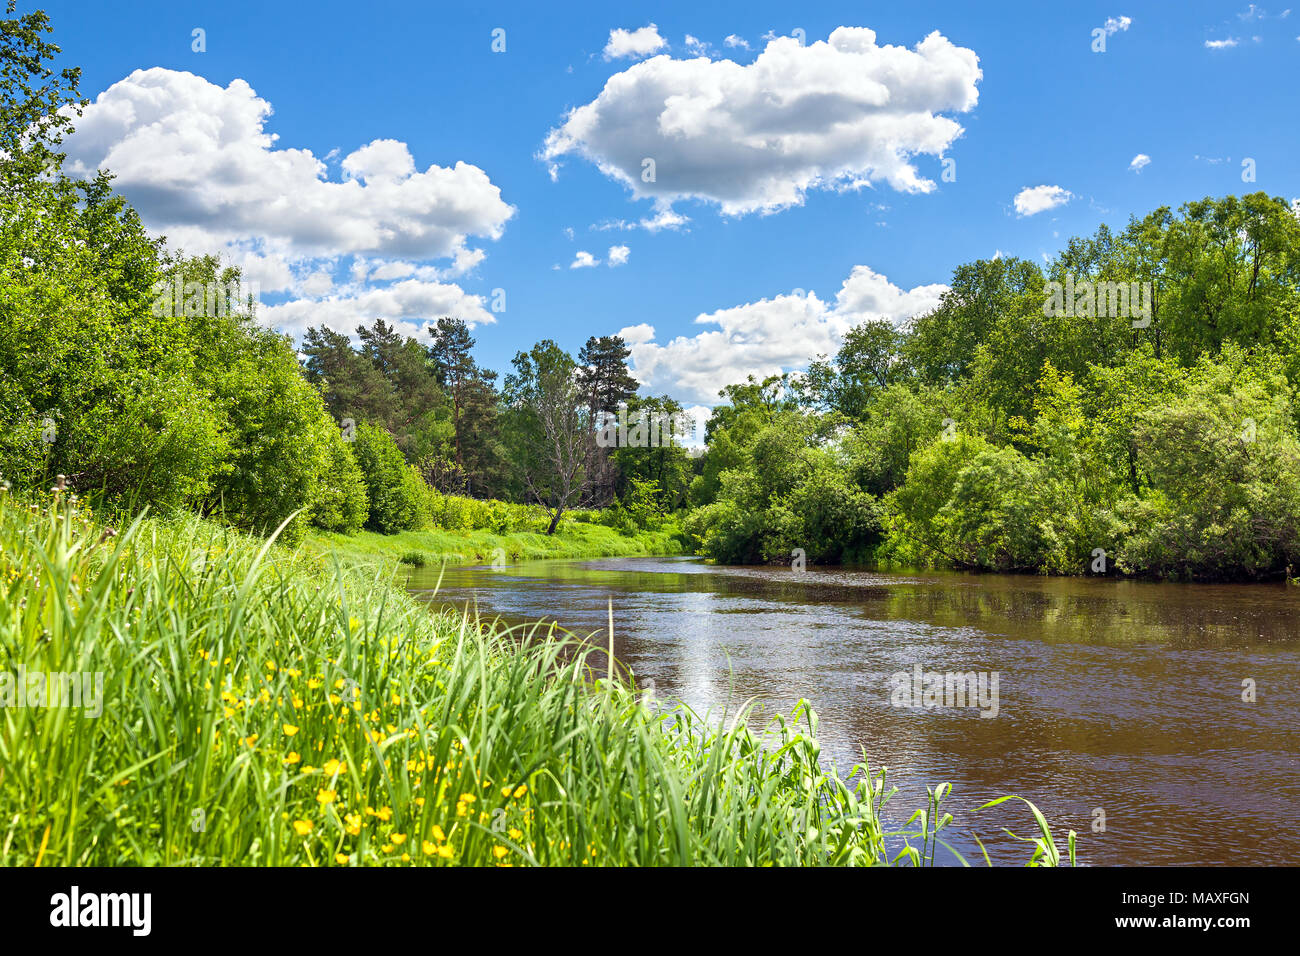 beautiful rural summer landscape with forest, river, blue sky and white clouds. spring landscape with lake, scenic view. Stock Photo